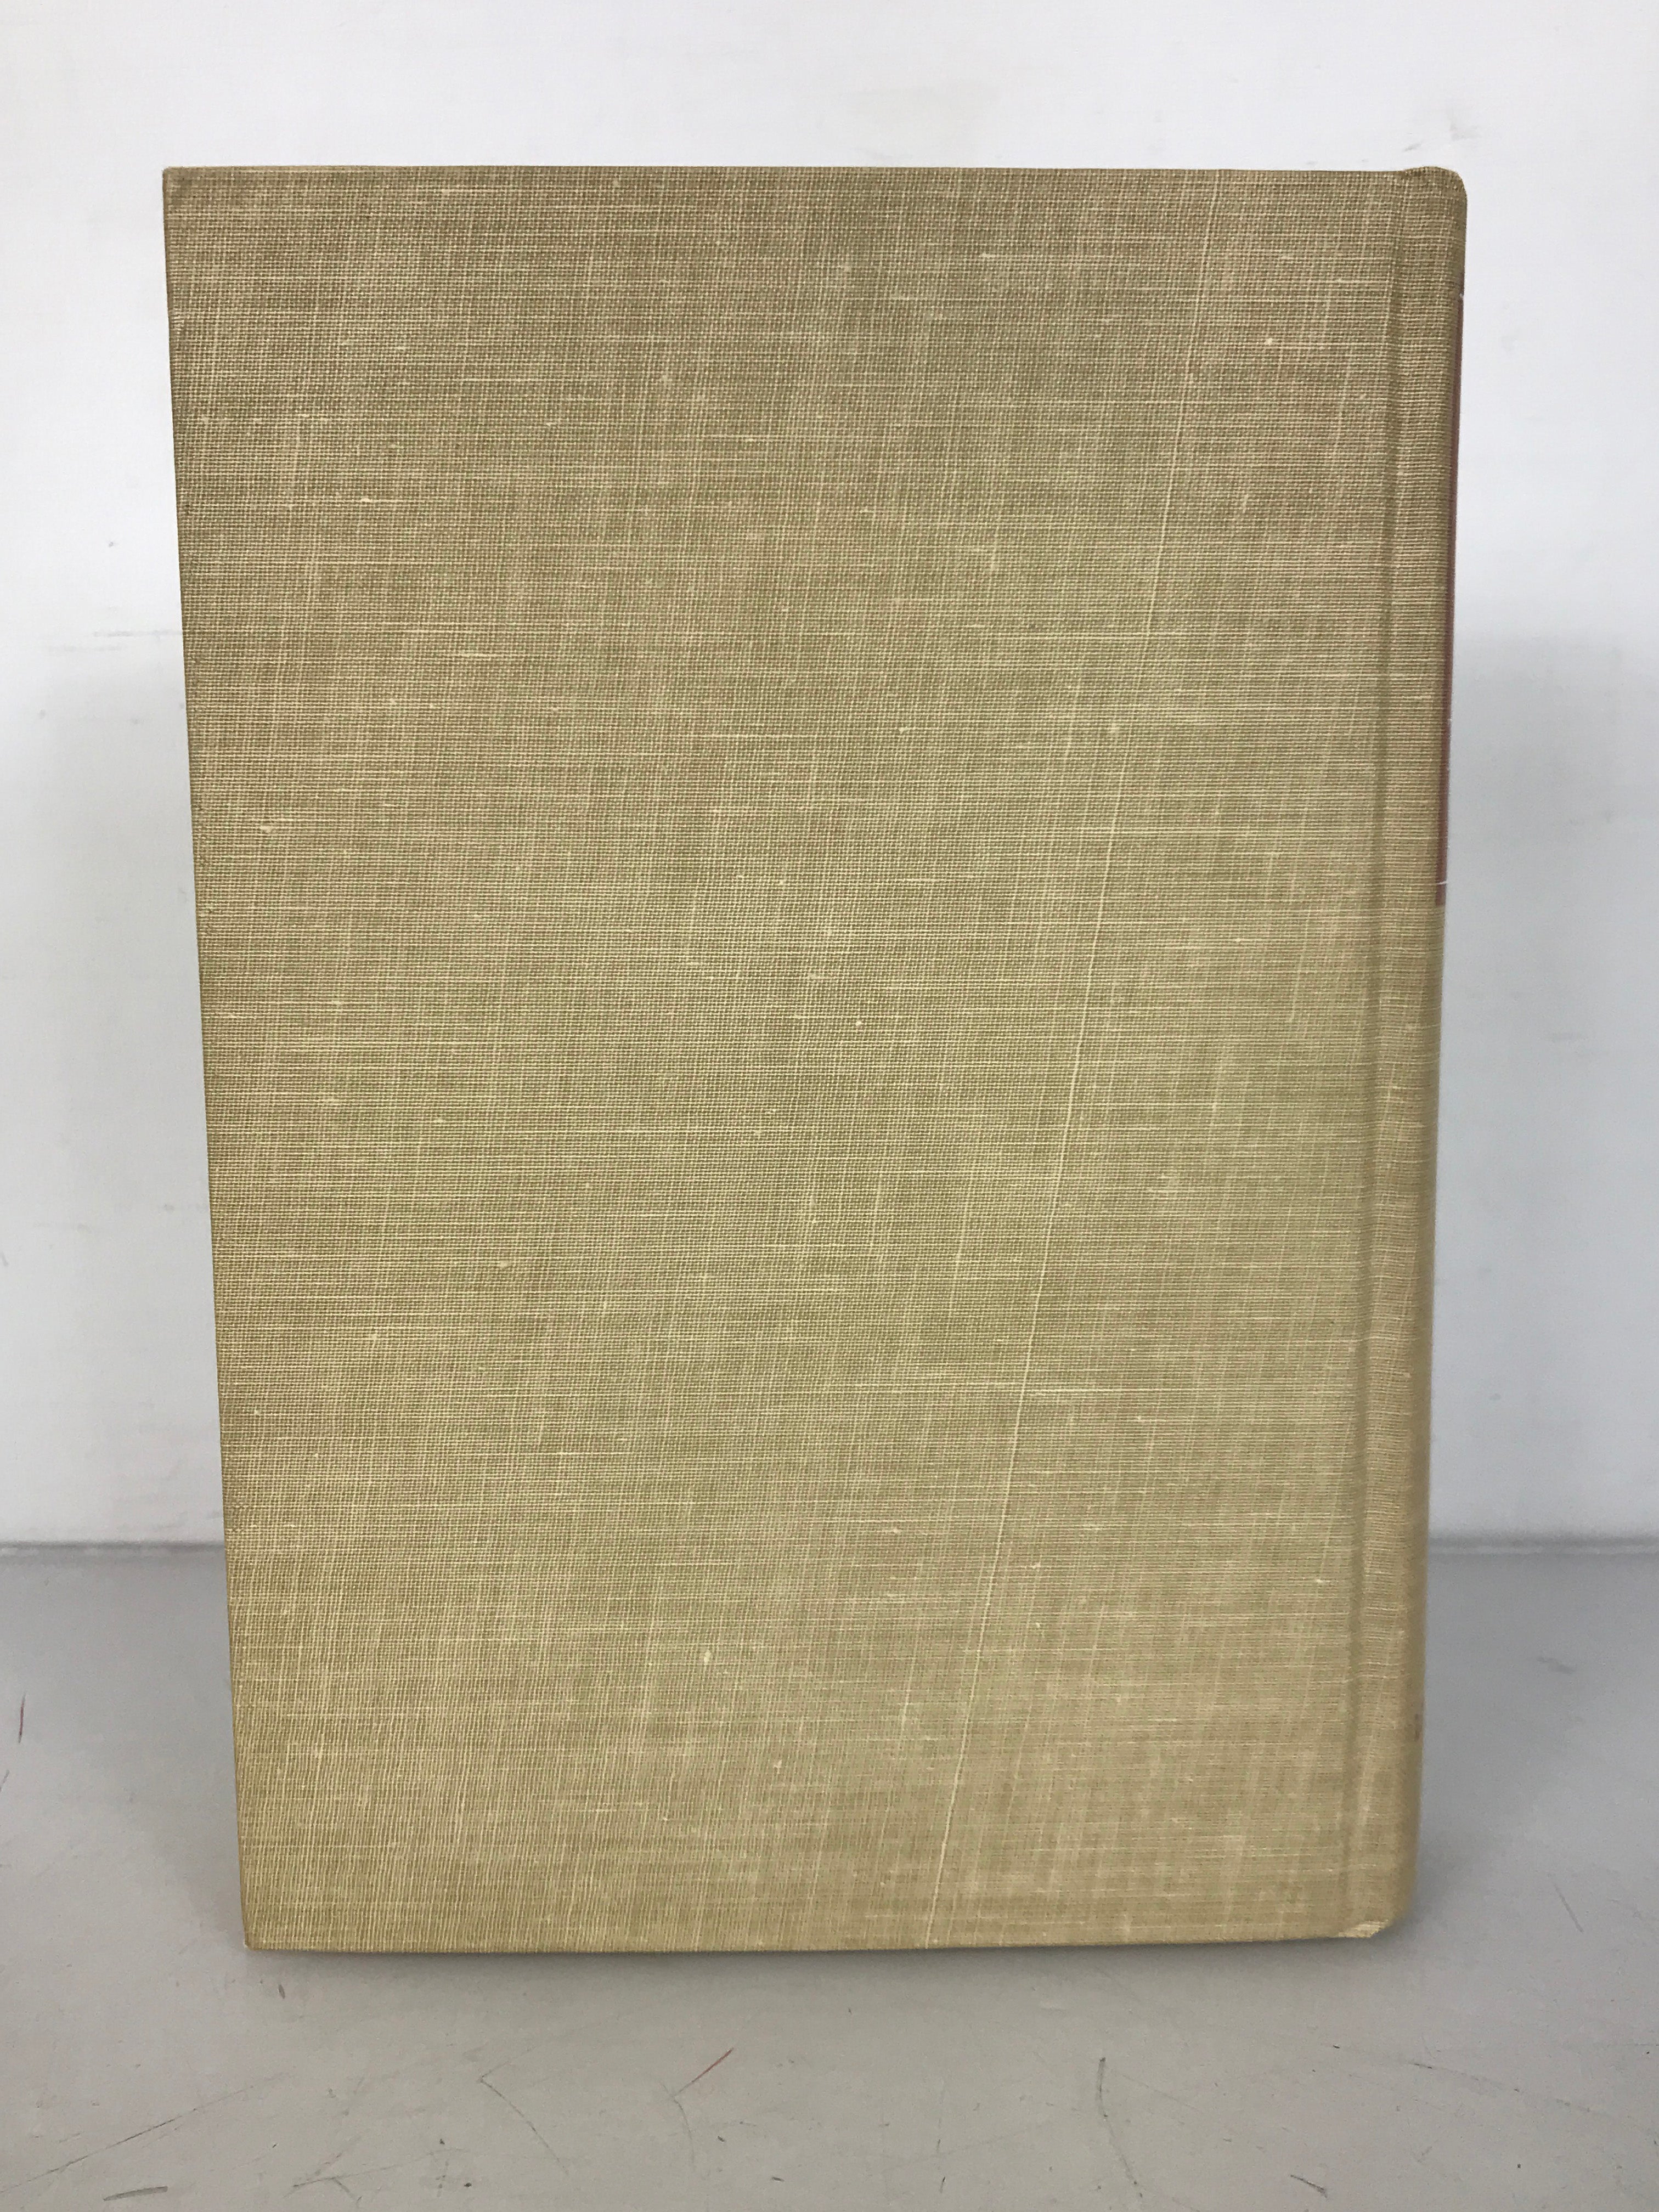 Paris in the Terror June 1793-July 1794 by Stanley Loomis First Edition 1964 HC